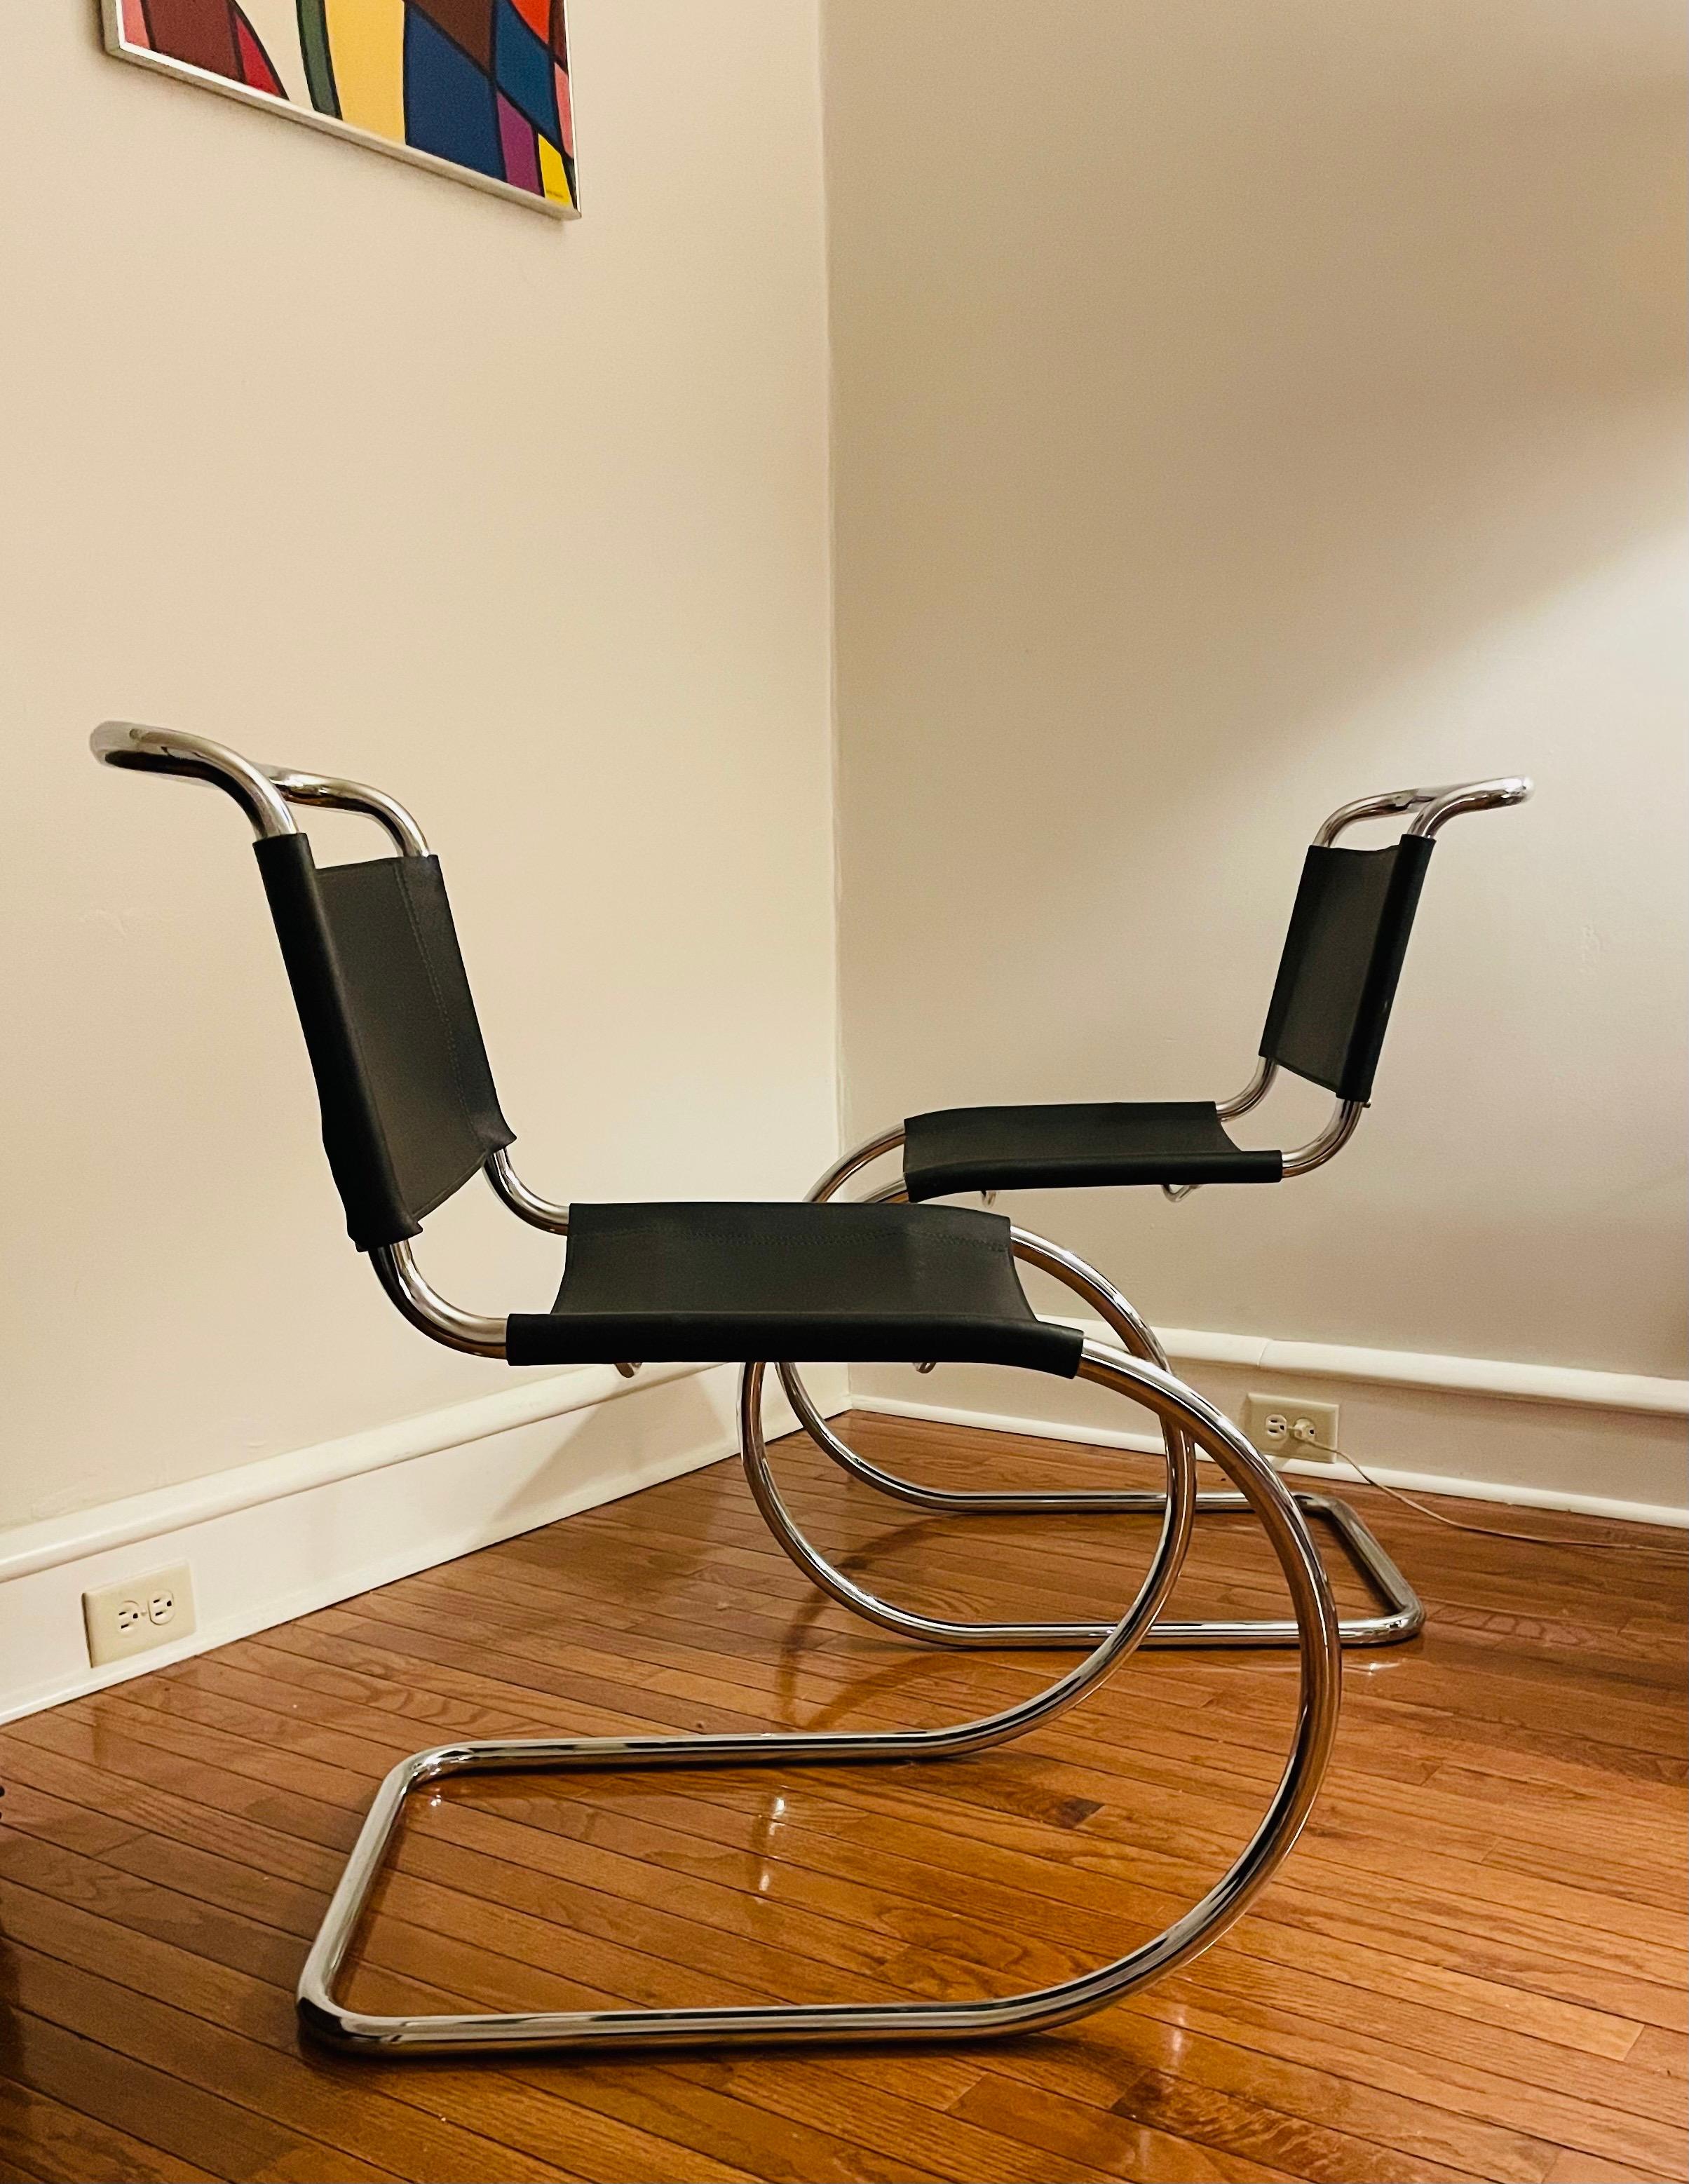 This is a pair of MR10 side dining chairs, initially designed by Ludwig Mies van der Rohe in 1927. These chairs date to the 1980s, and are unmarked. 

They have tubular steel cantilevered frames, and thick black calf leather seats and backs. They